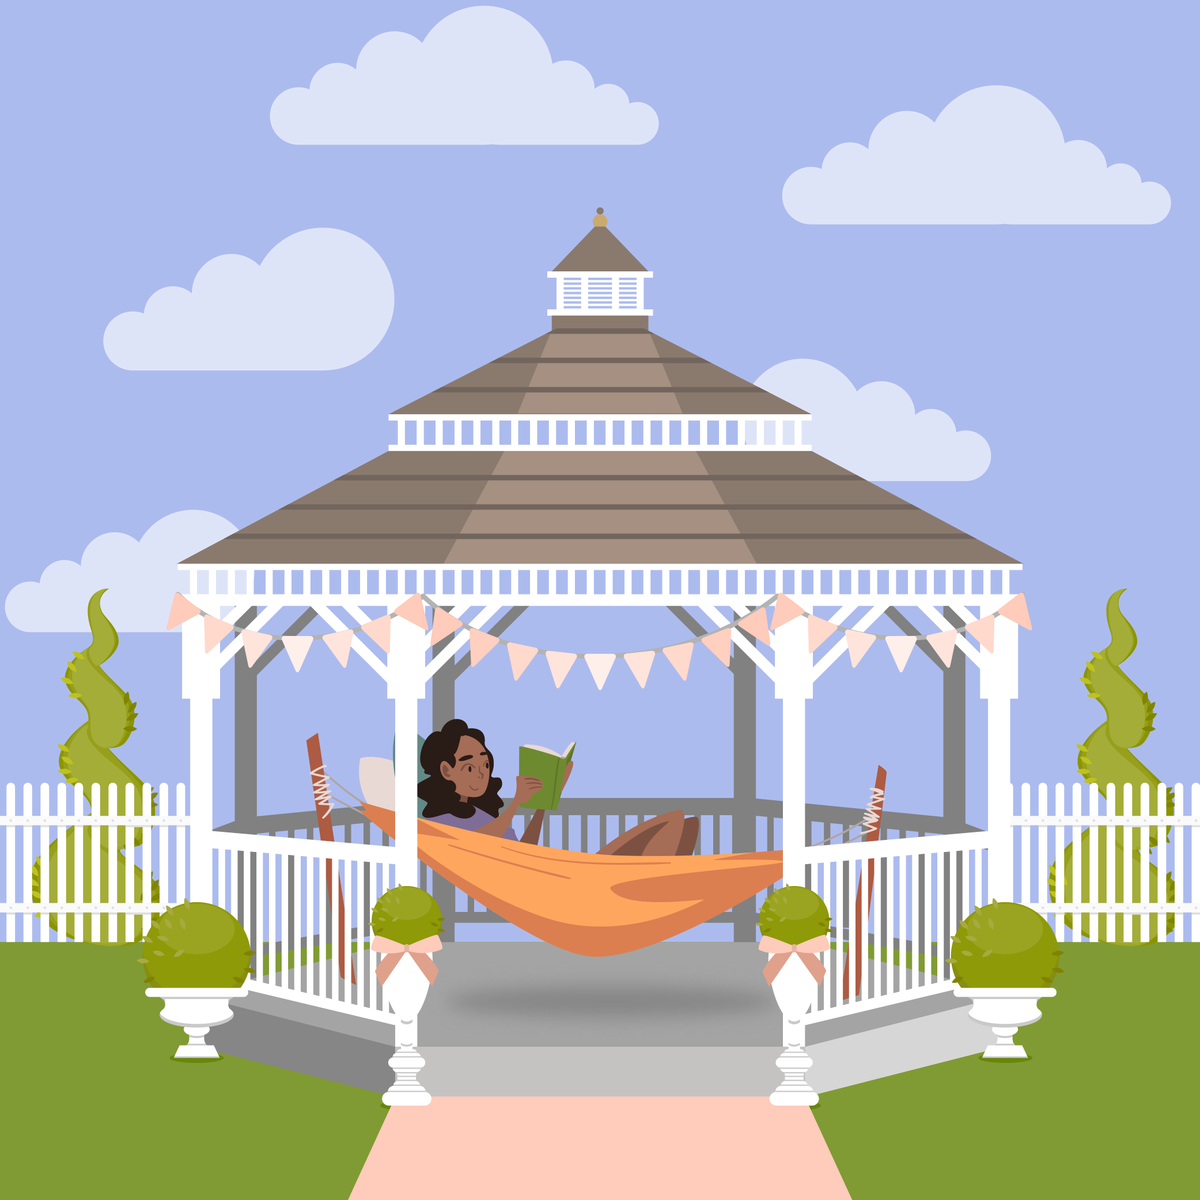 Do you have a gazebo? Make it your de-stress zone this summer! #HomeStyles
Opening The DOOR to Your Next HOME!